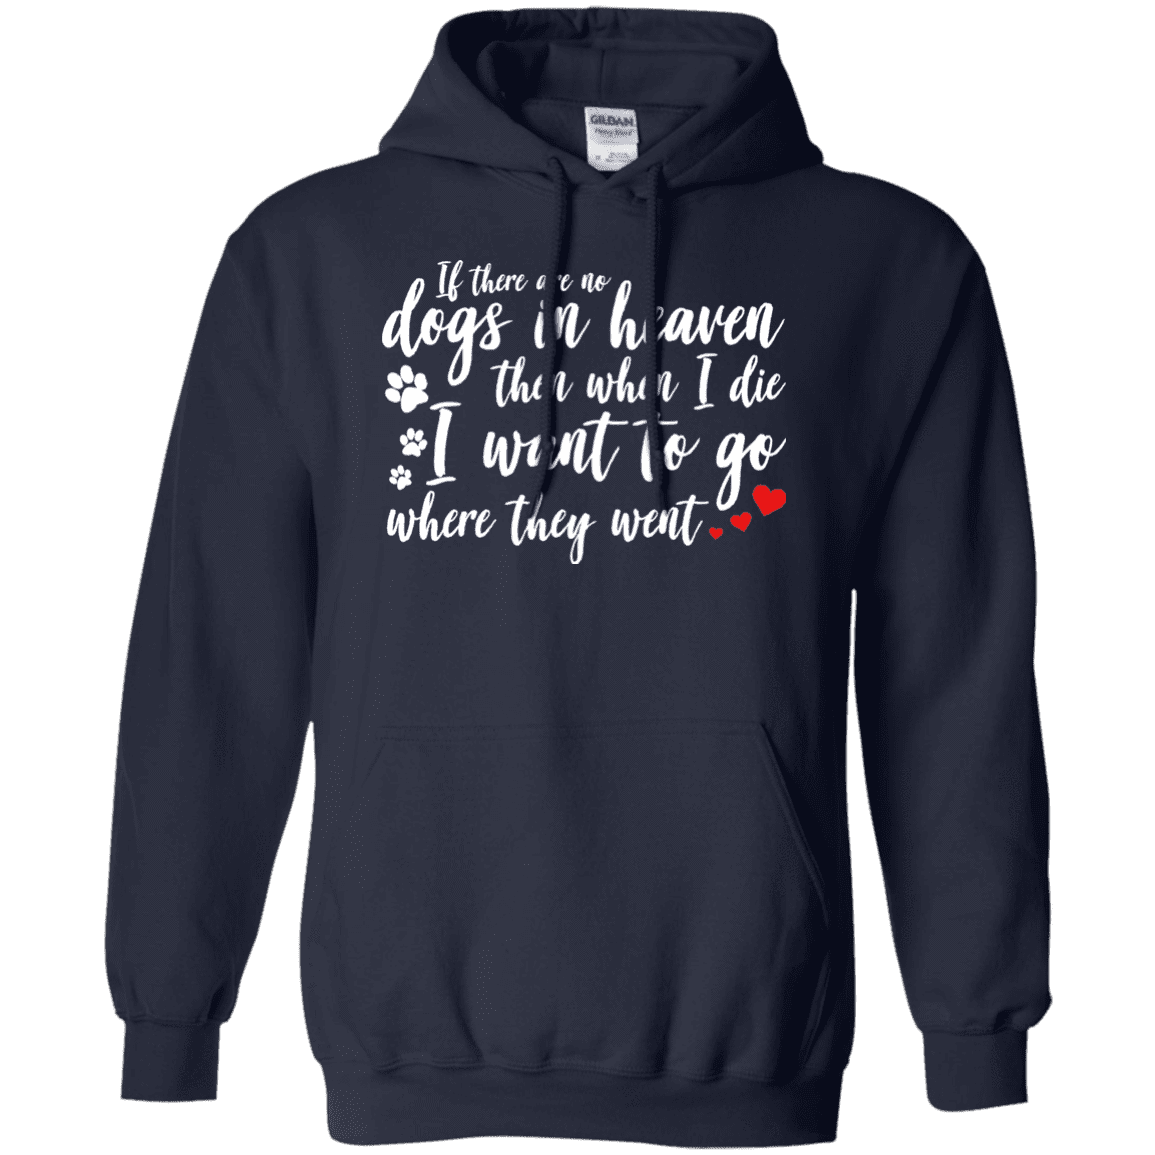 If There Are No Dogs In Heaven - Hoodie.